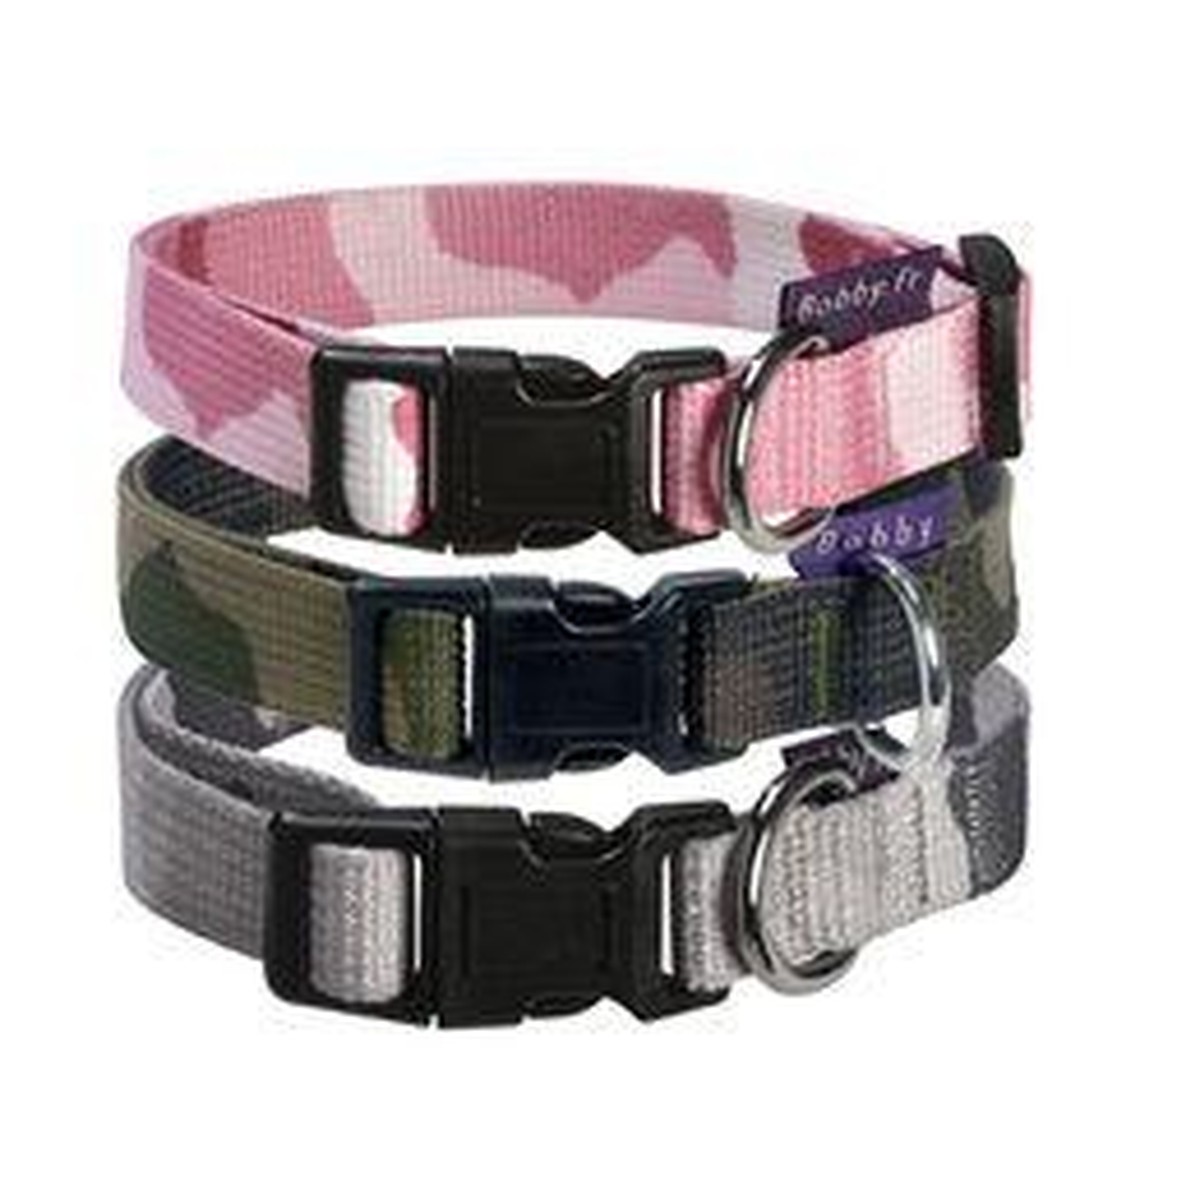 Bobby camouflage COLLIER CAMOUFLAGE M Rouge rose M